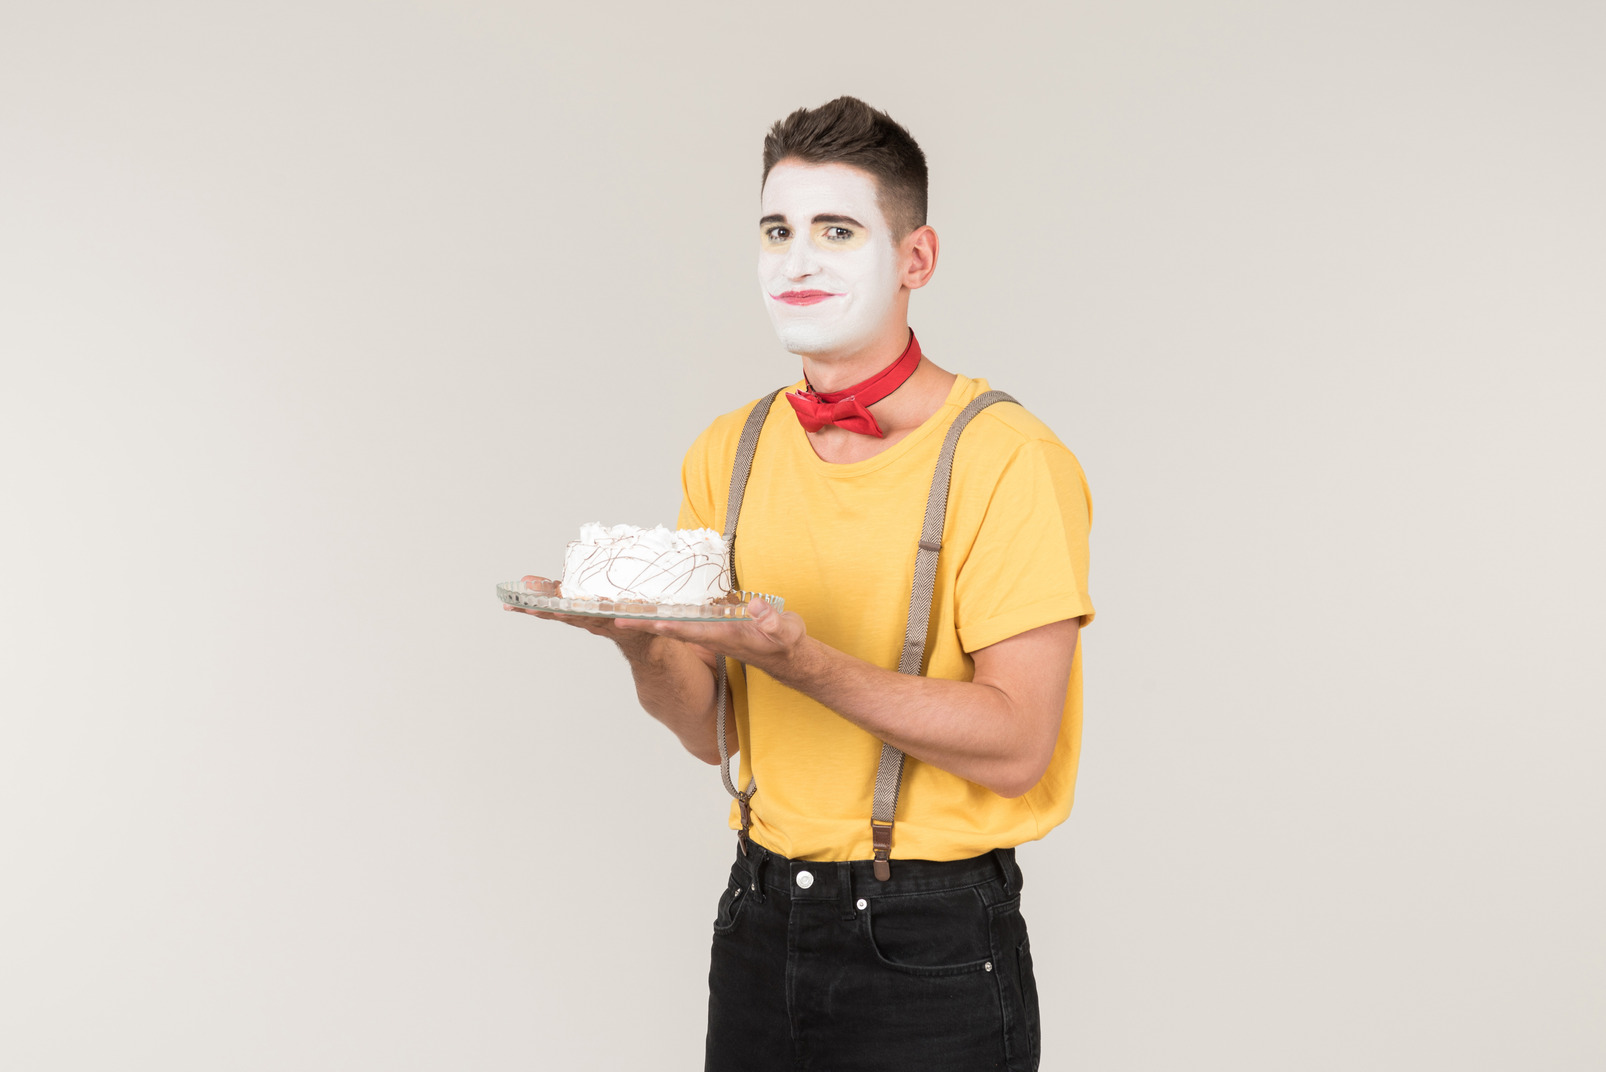 Male clown holding a white cake